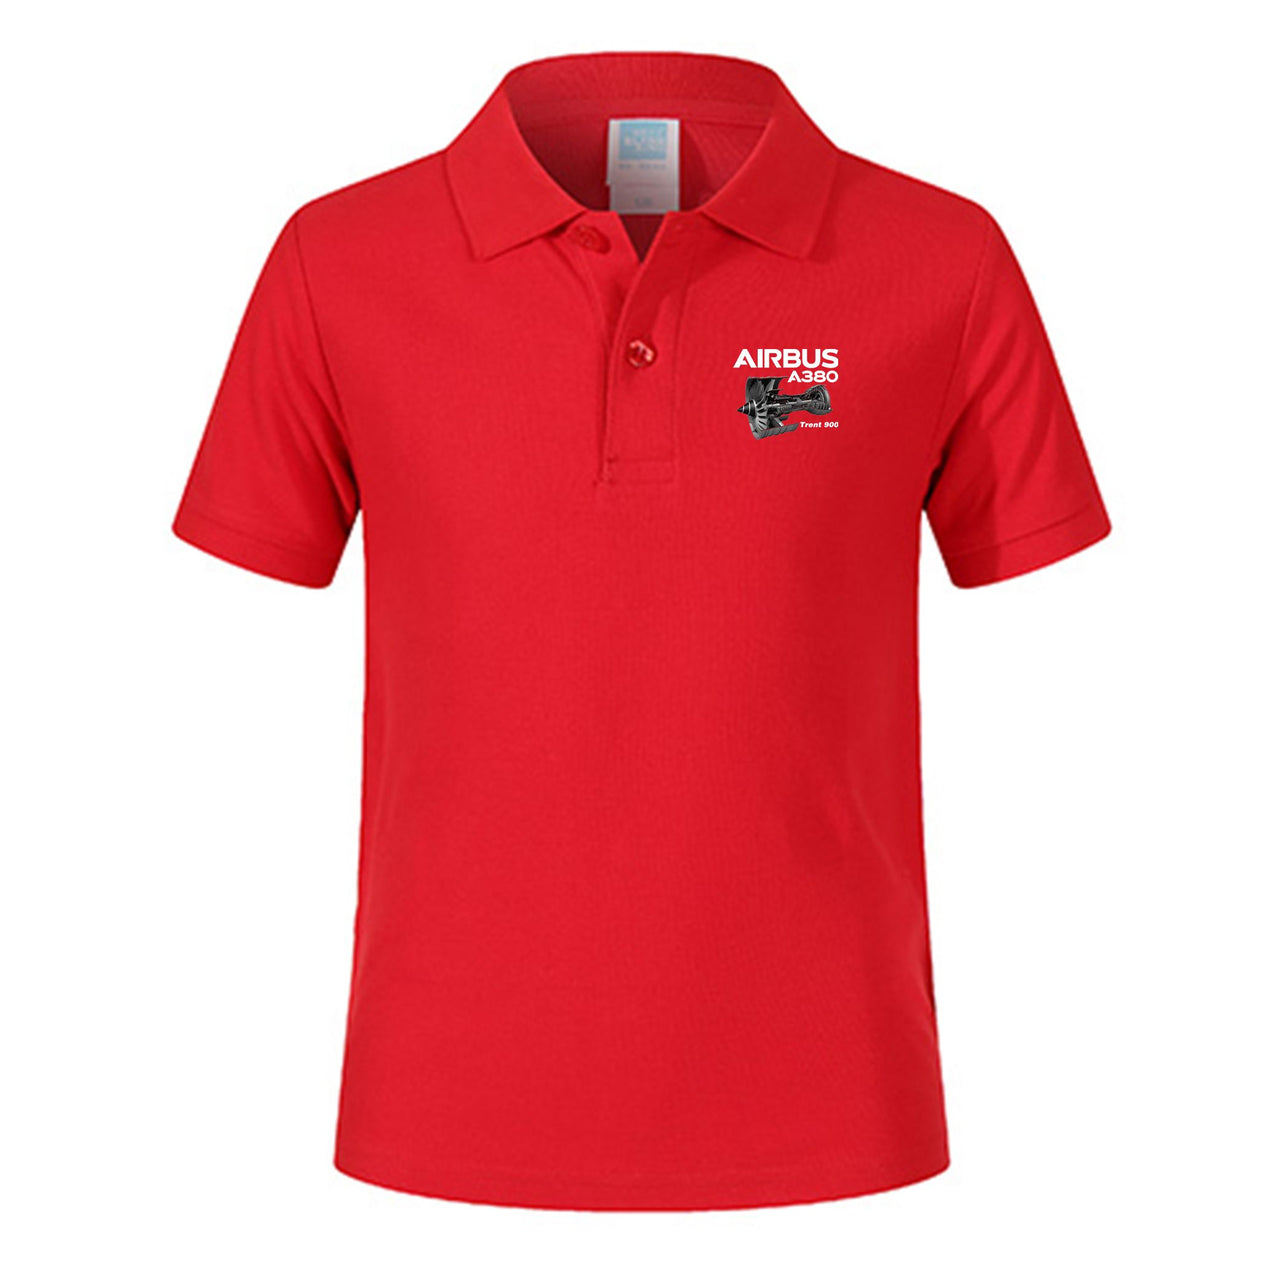 Airbus A380 & Trent 900 Engine Designed Children Polo T-Shirts